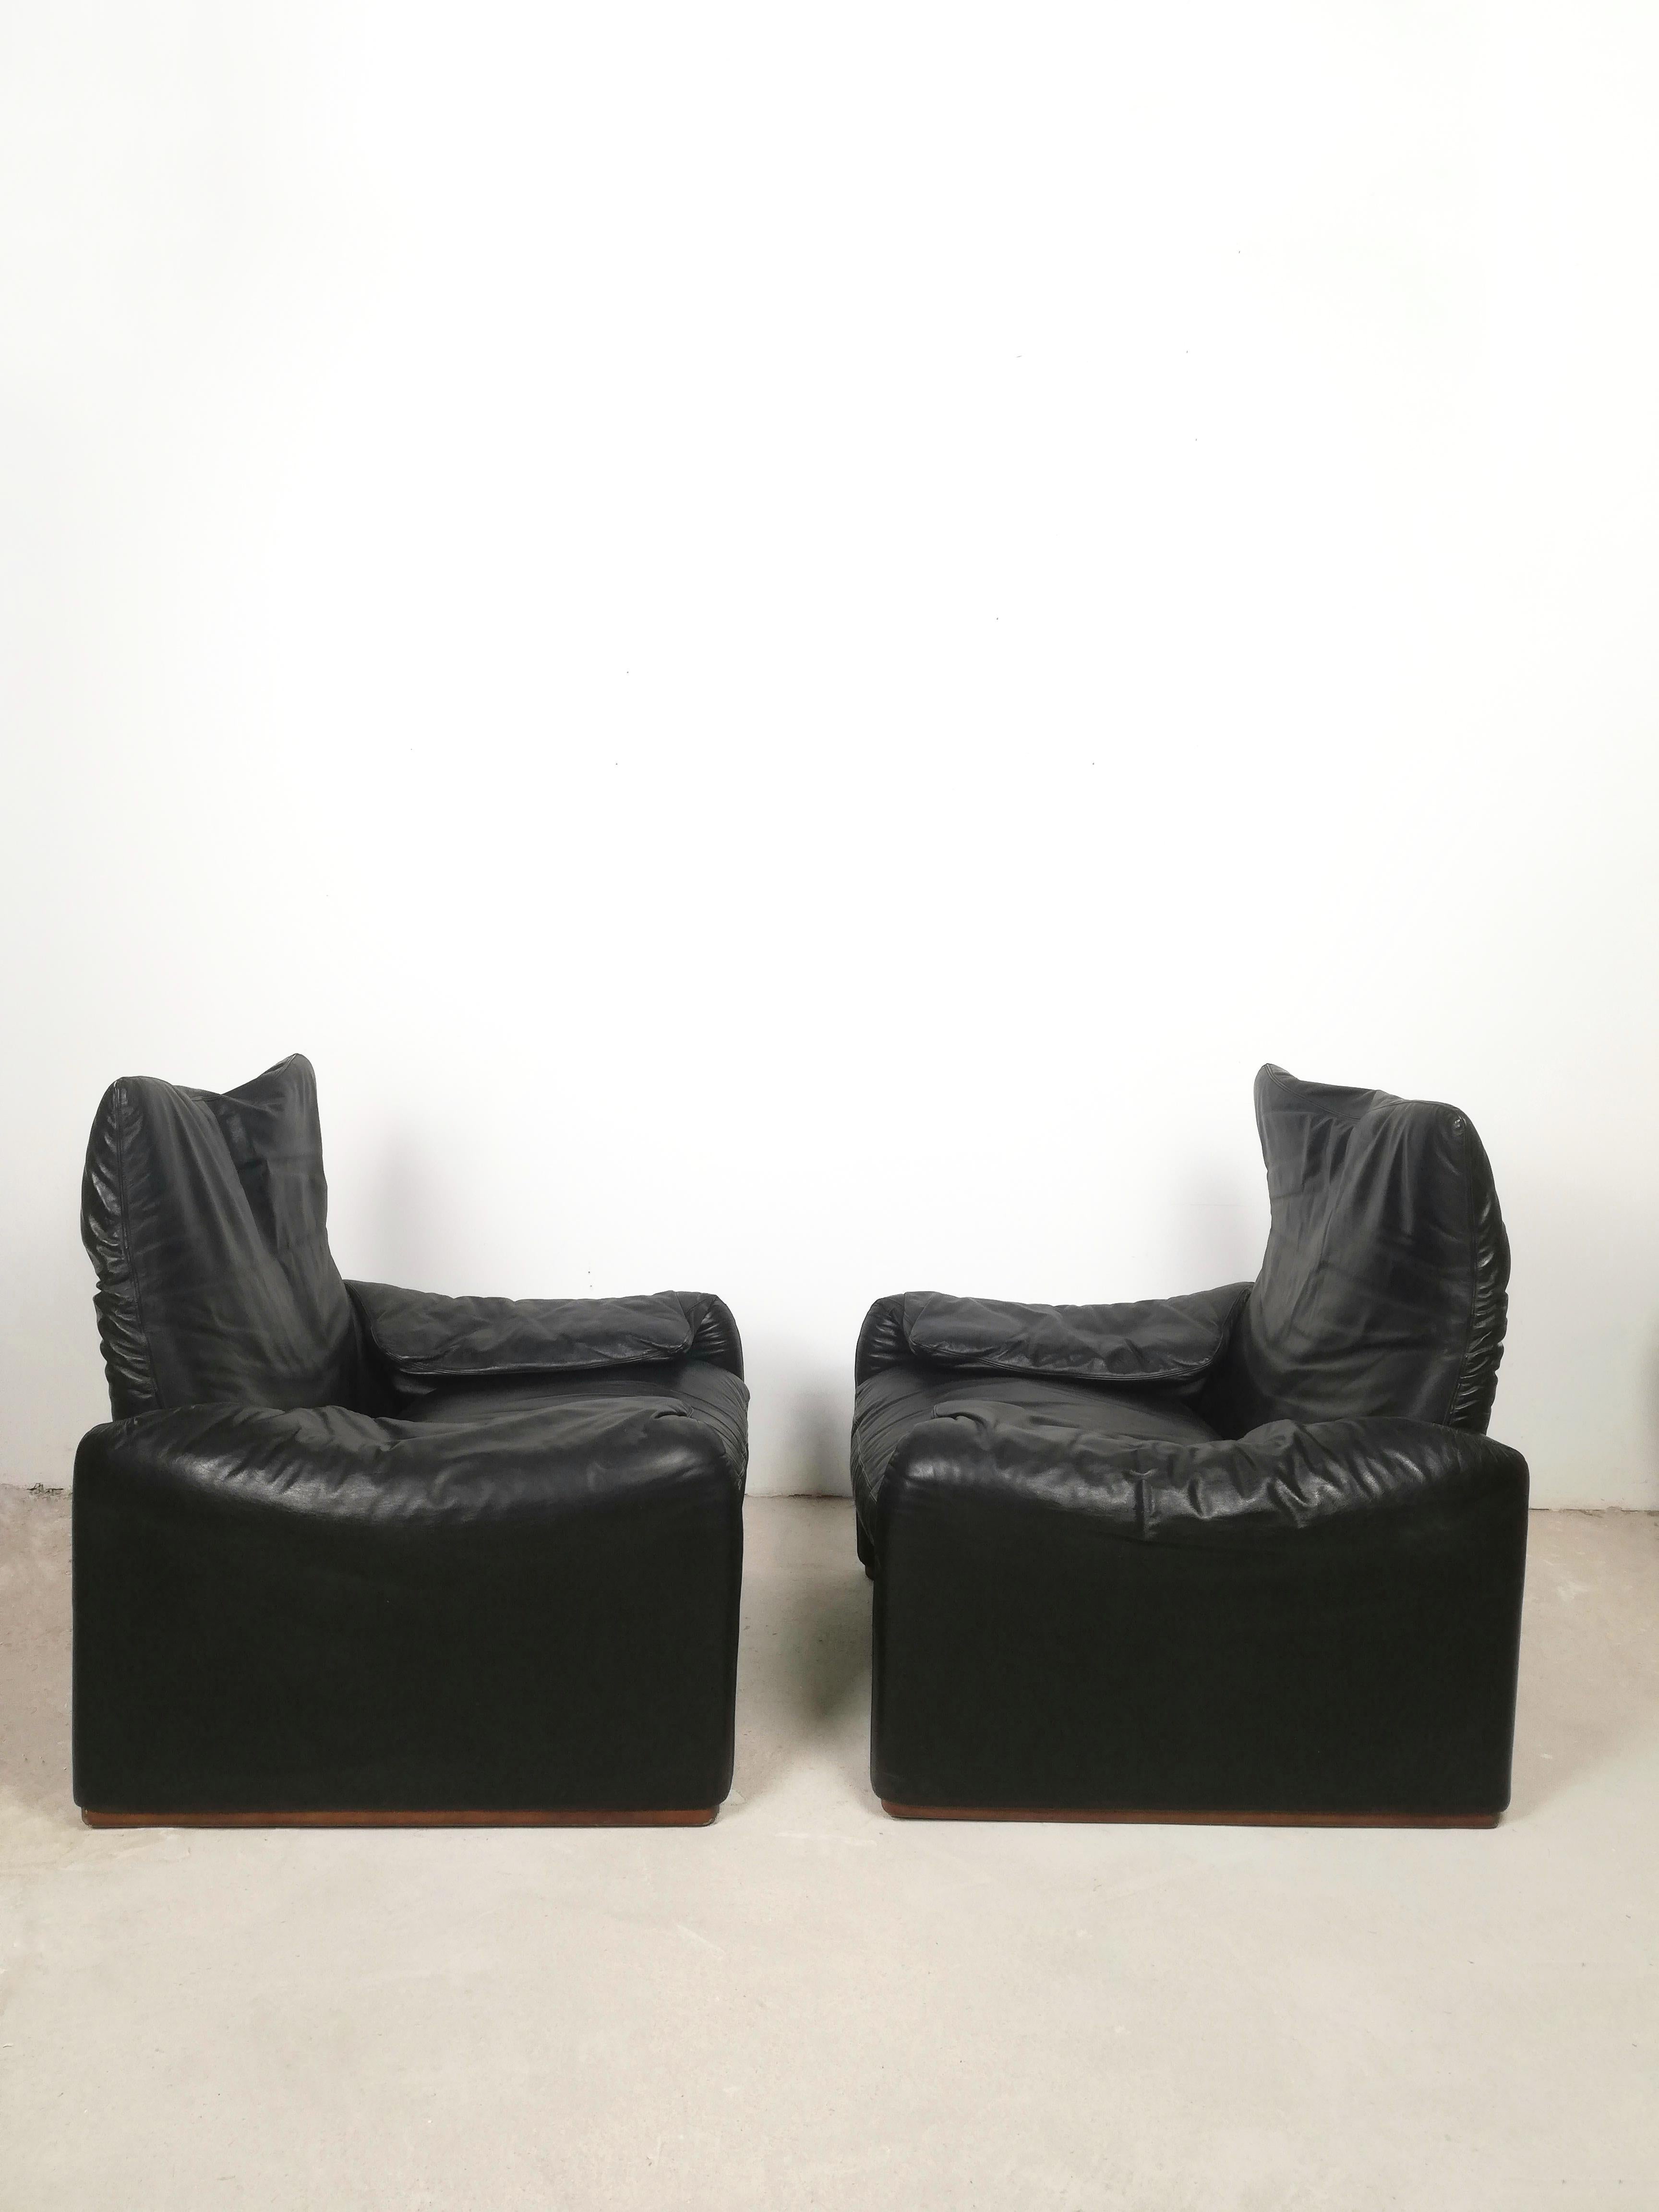 Mid-Century Modern Set of Two Maralunga Black Leather Armchairs by Vico Magistretti For Sale